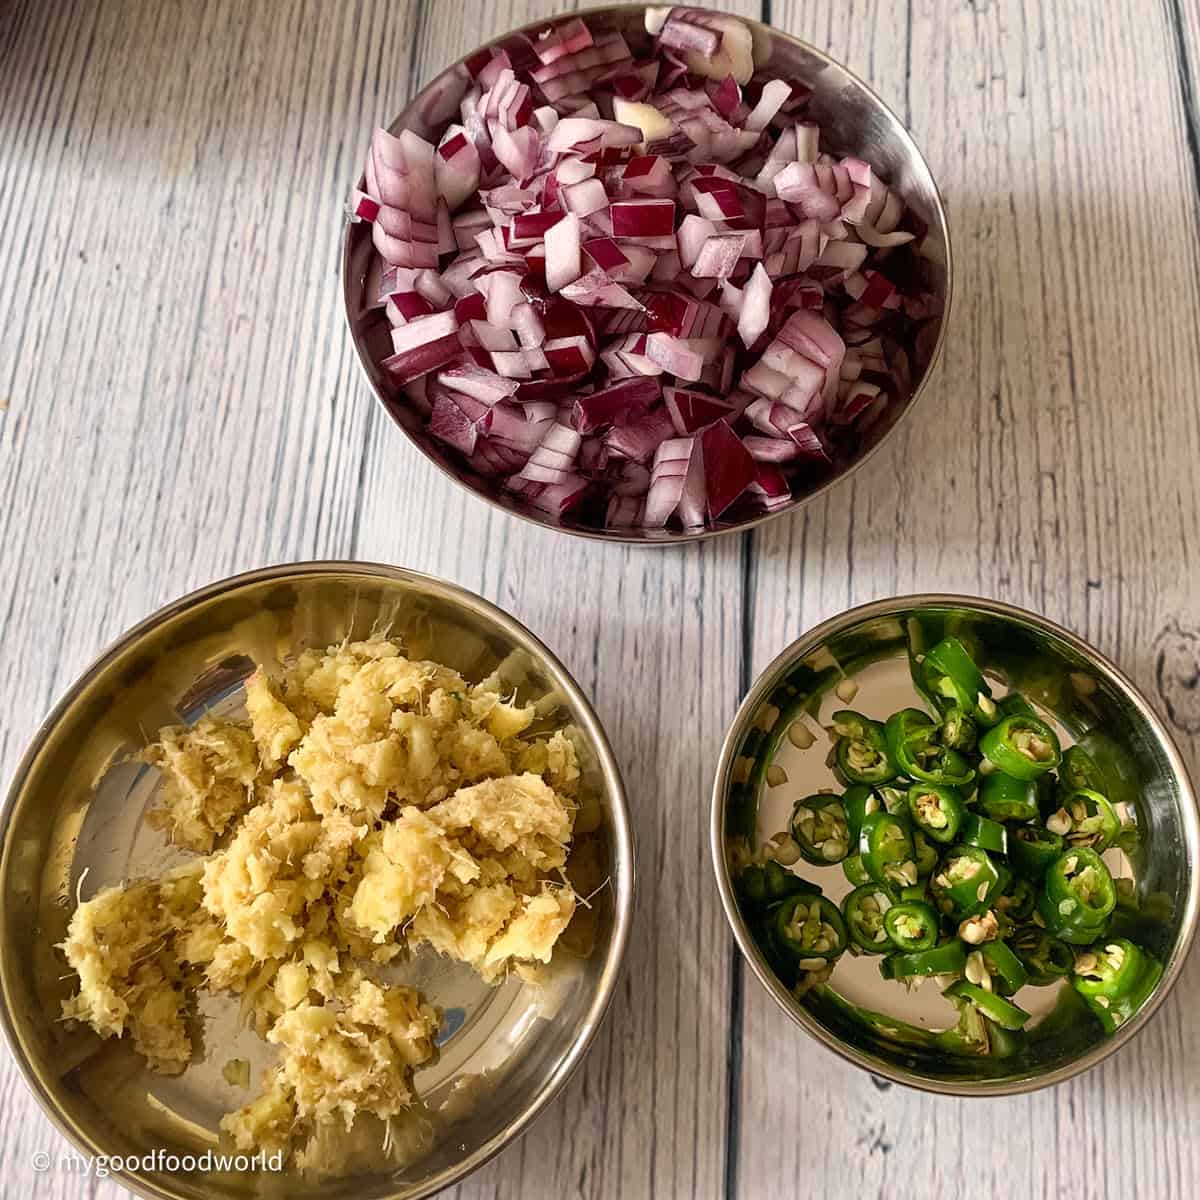 Three bowls of food ingredients, one with chopped red onions, one with crushed ginger, and one with sliced green chilies.